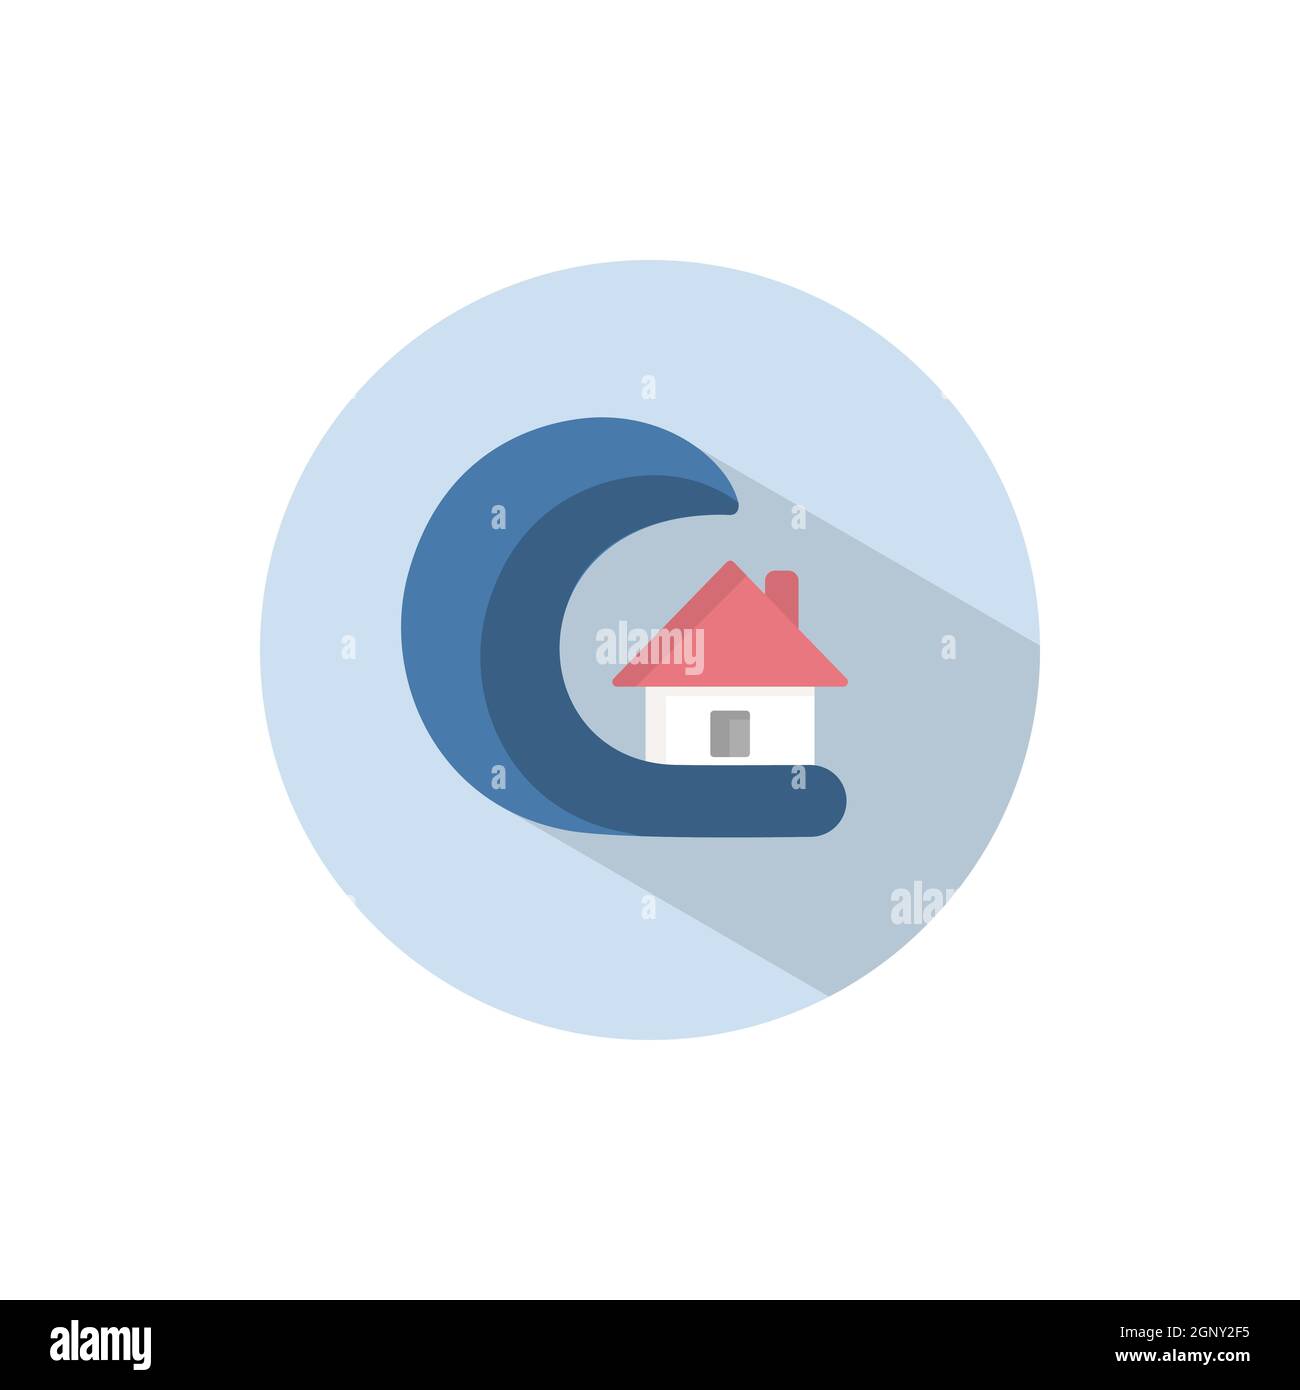 Tsunami. Flat icon on a circle. Weather vector illustration Stock Vector